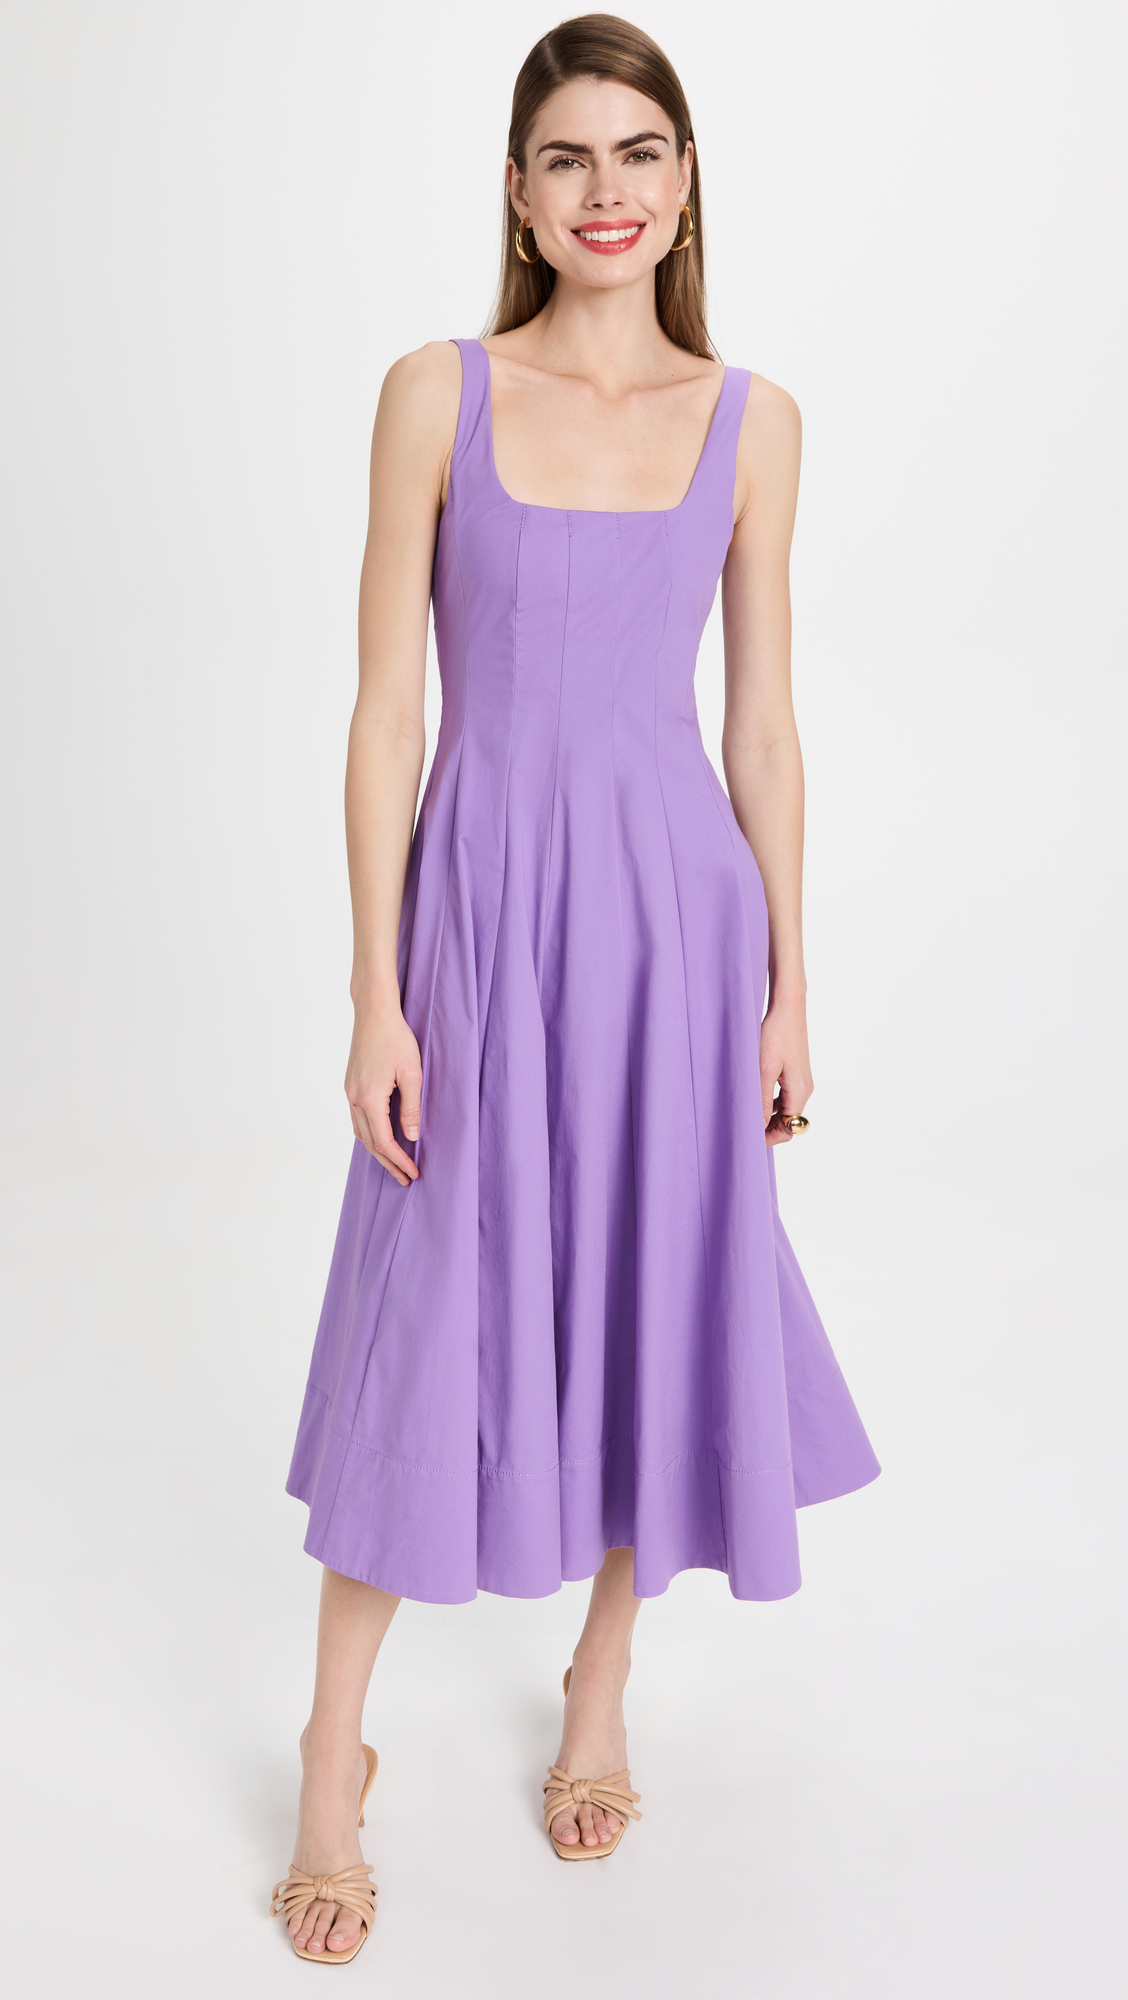 36 Lavender Pieces That Are So Pretty for Spring | Who What Wear